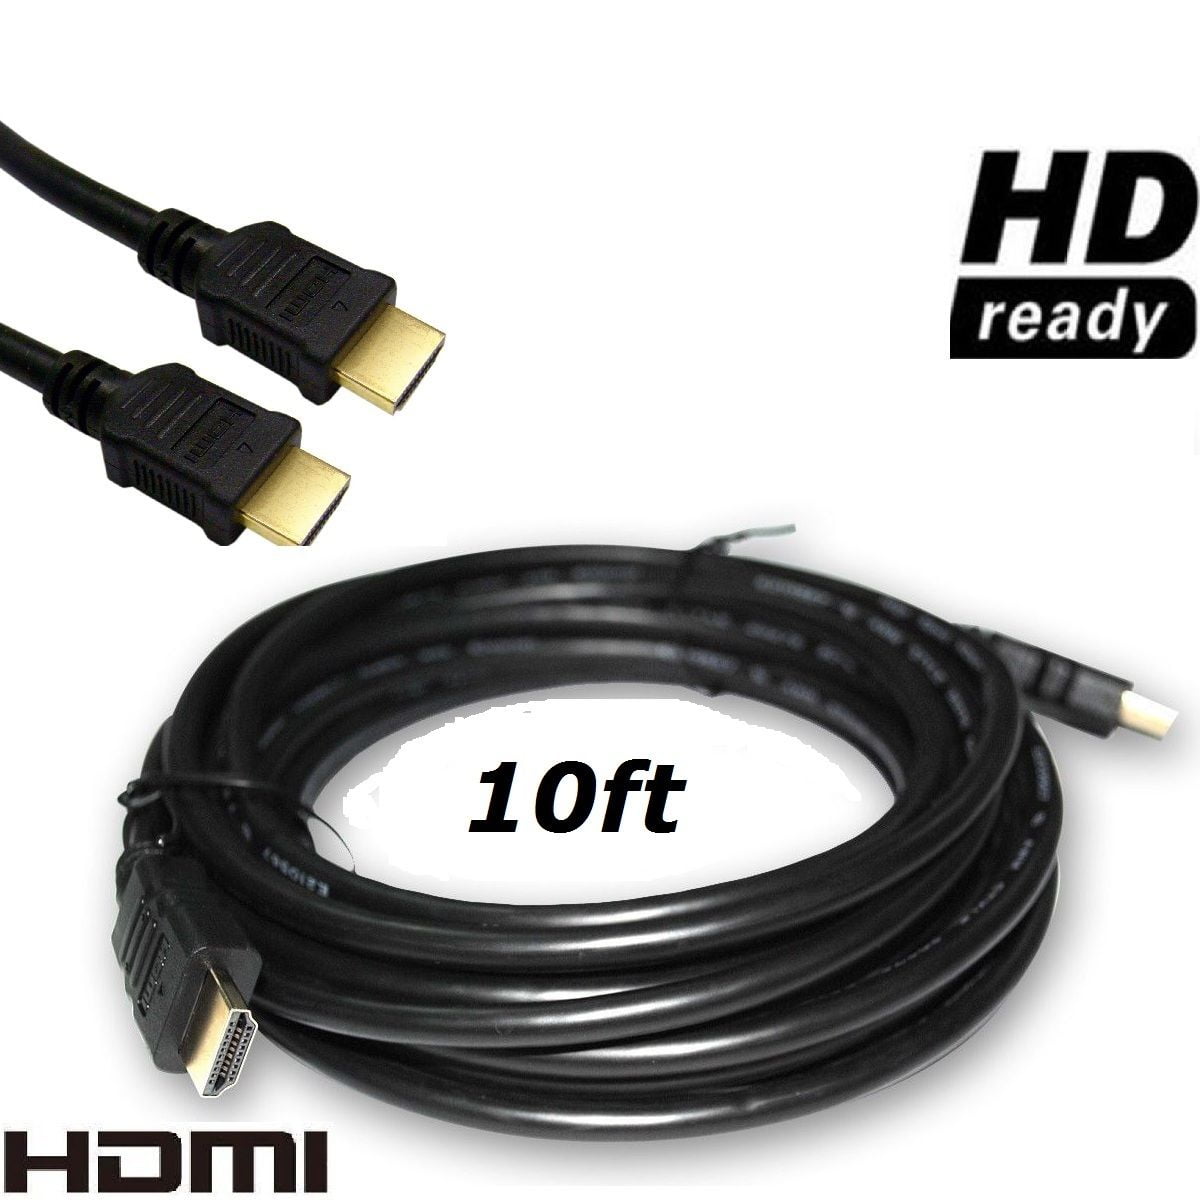 3M High Speed HDMI Cable for Laptop, HDTV, Blu-Ray, DVD, Projector, etc